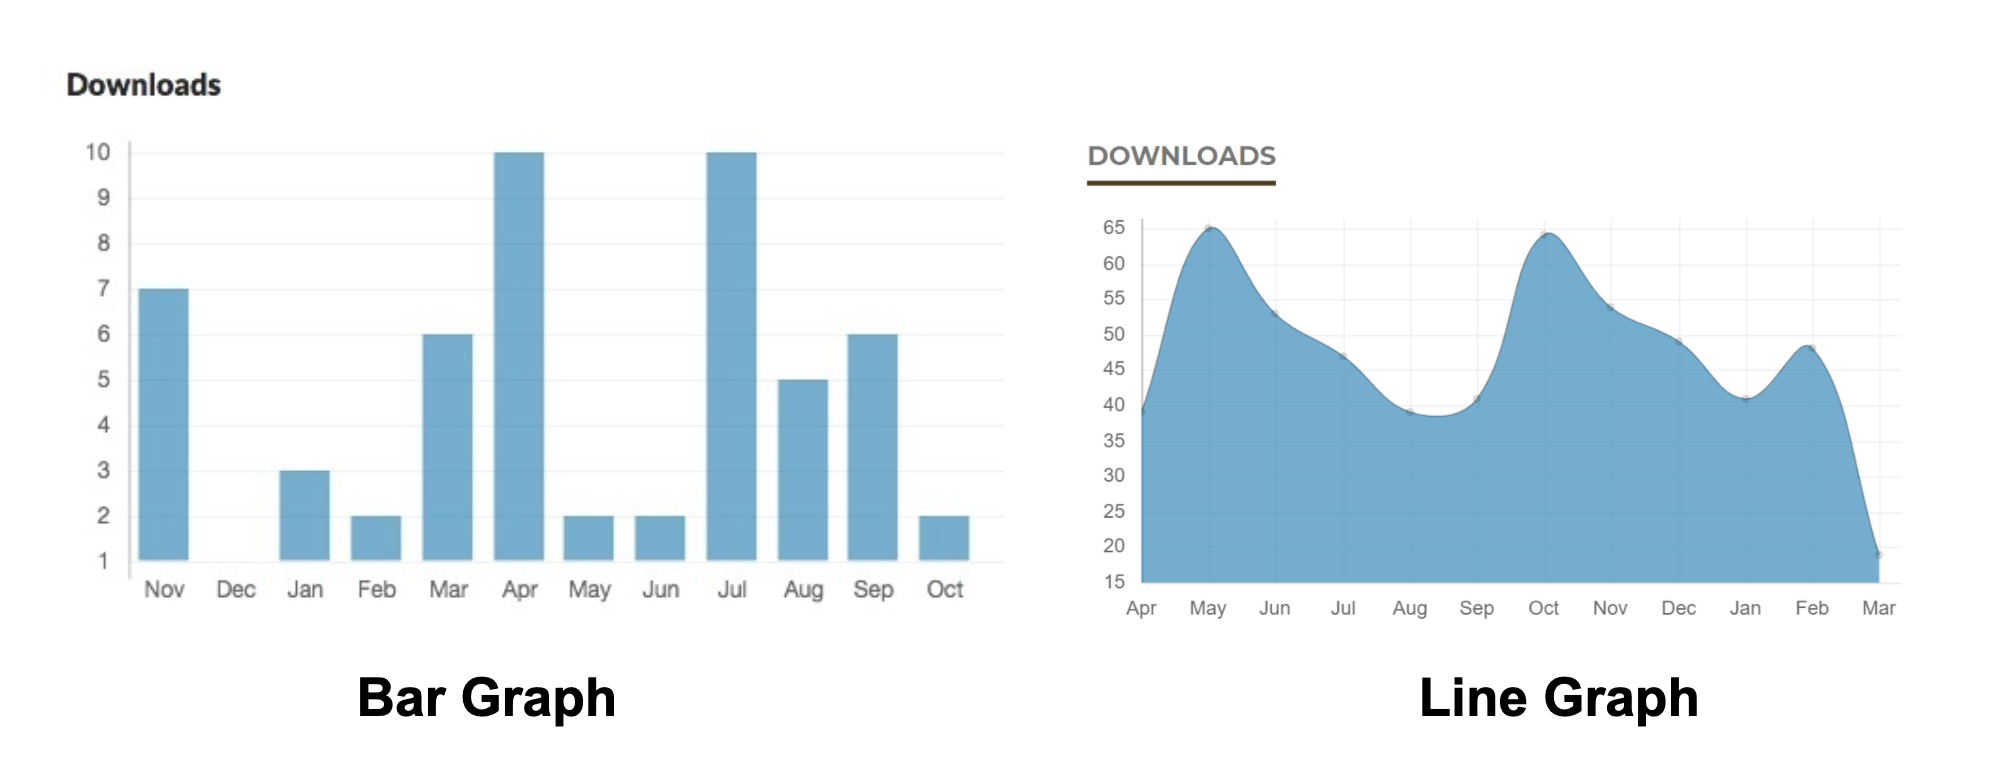 Bar and line graphs of article downloads.